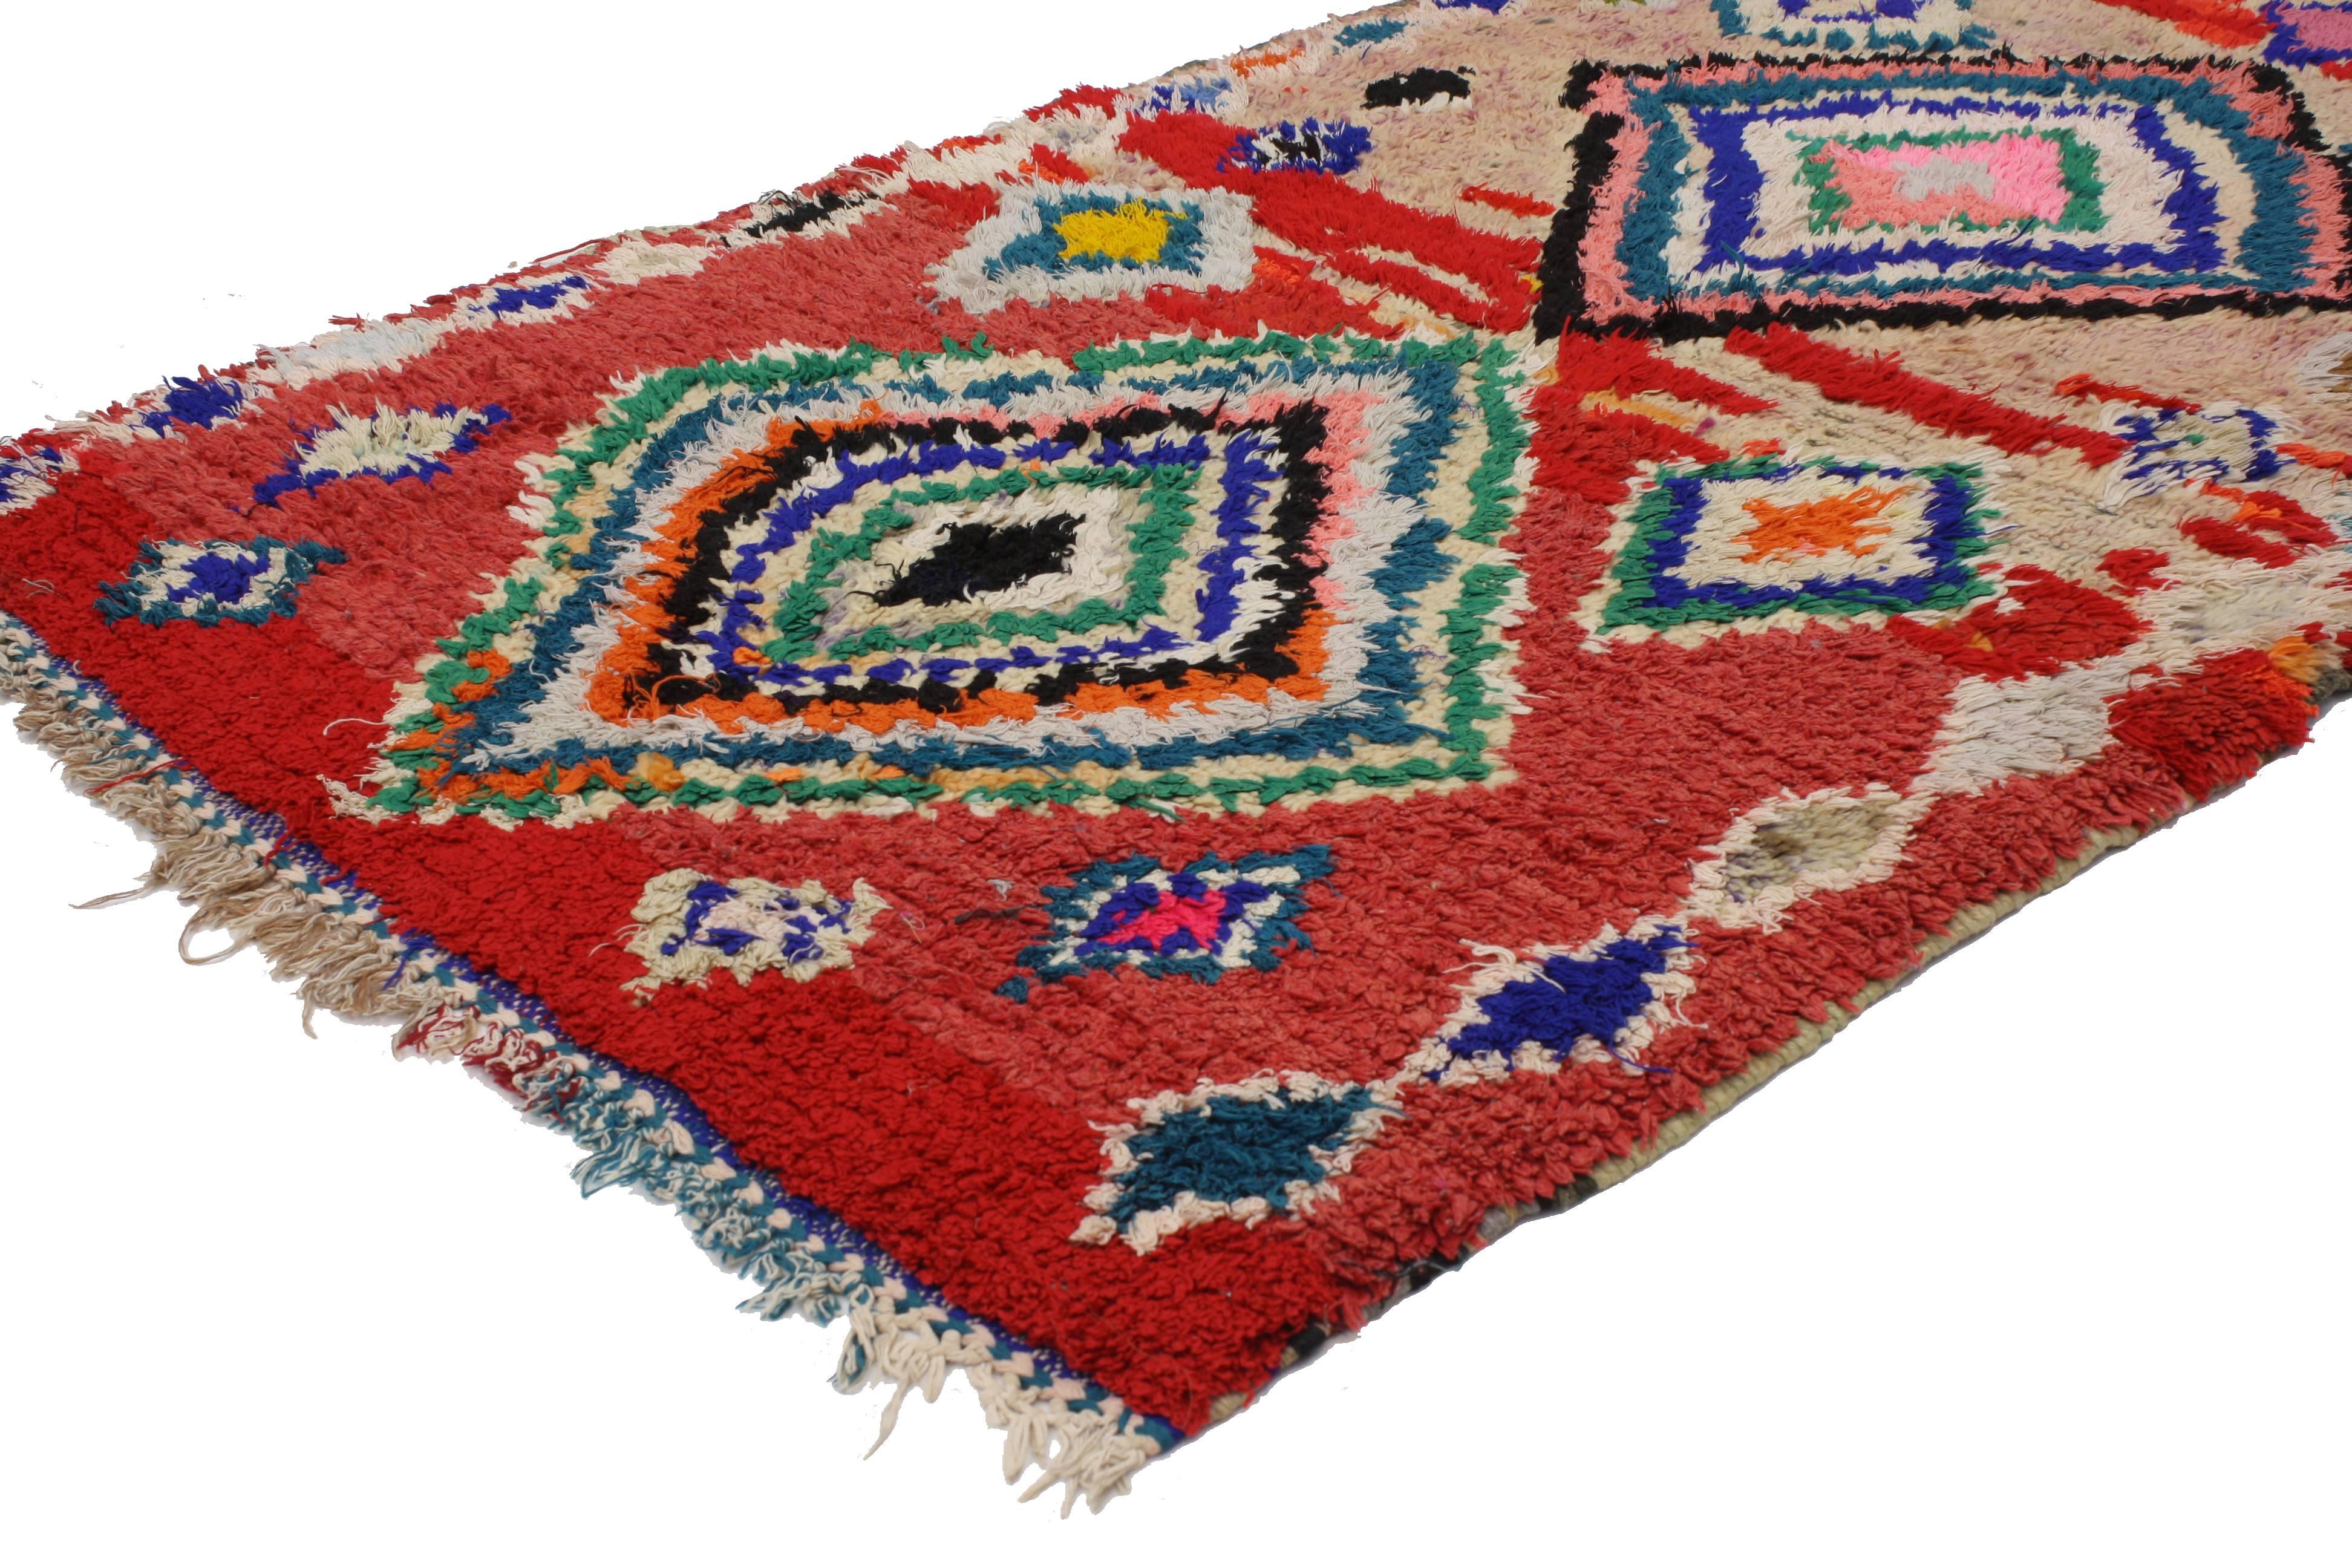 With the dramatic red color and modern tribal style, this vintage Berber Moroccan rug is not for the timid. Rendered in red, hot pink, blue, teal, aqua, green, powder blue, black, gray, lavender with colorful accents. Features two large diamonds